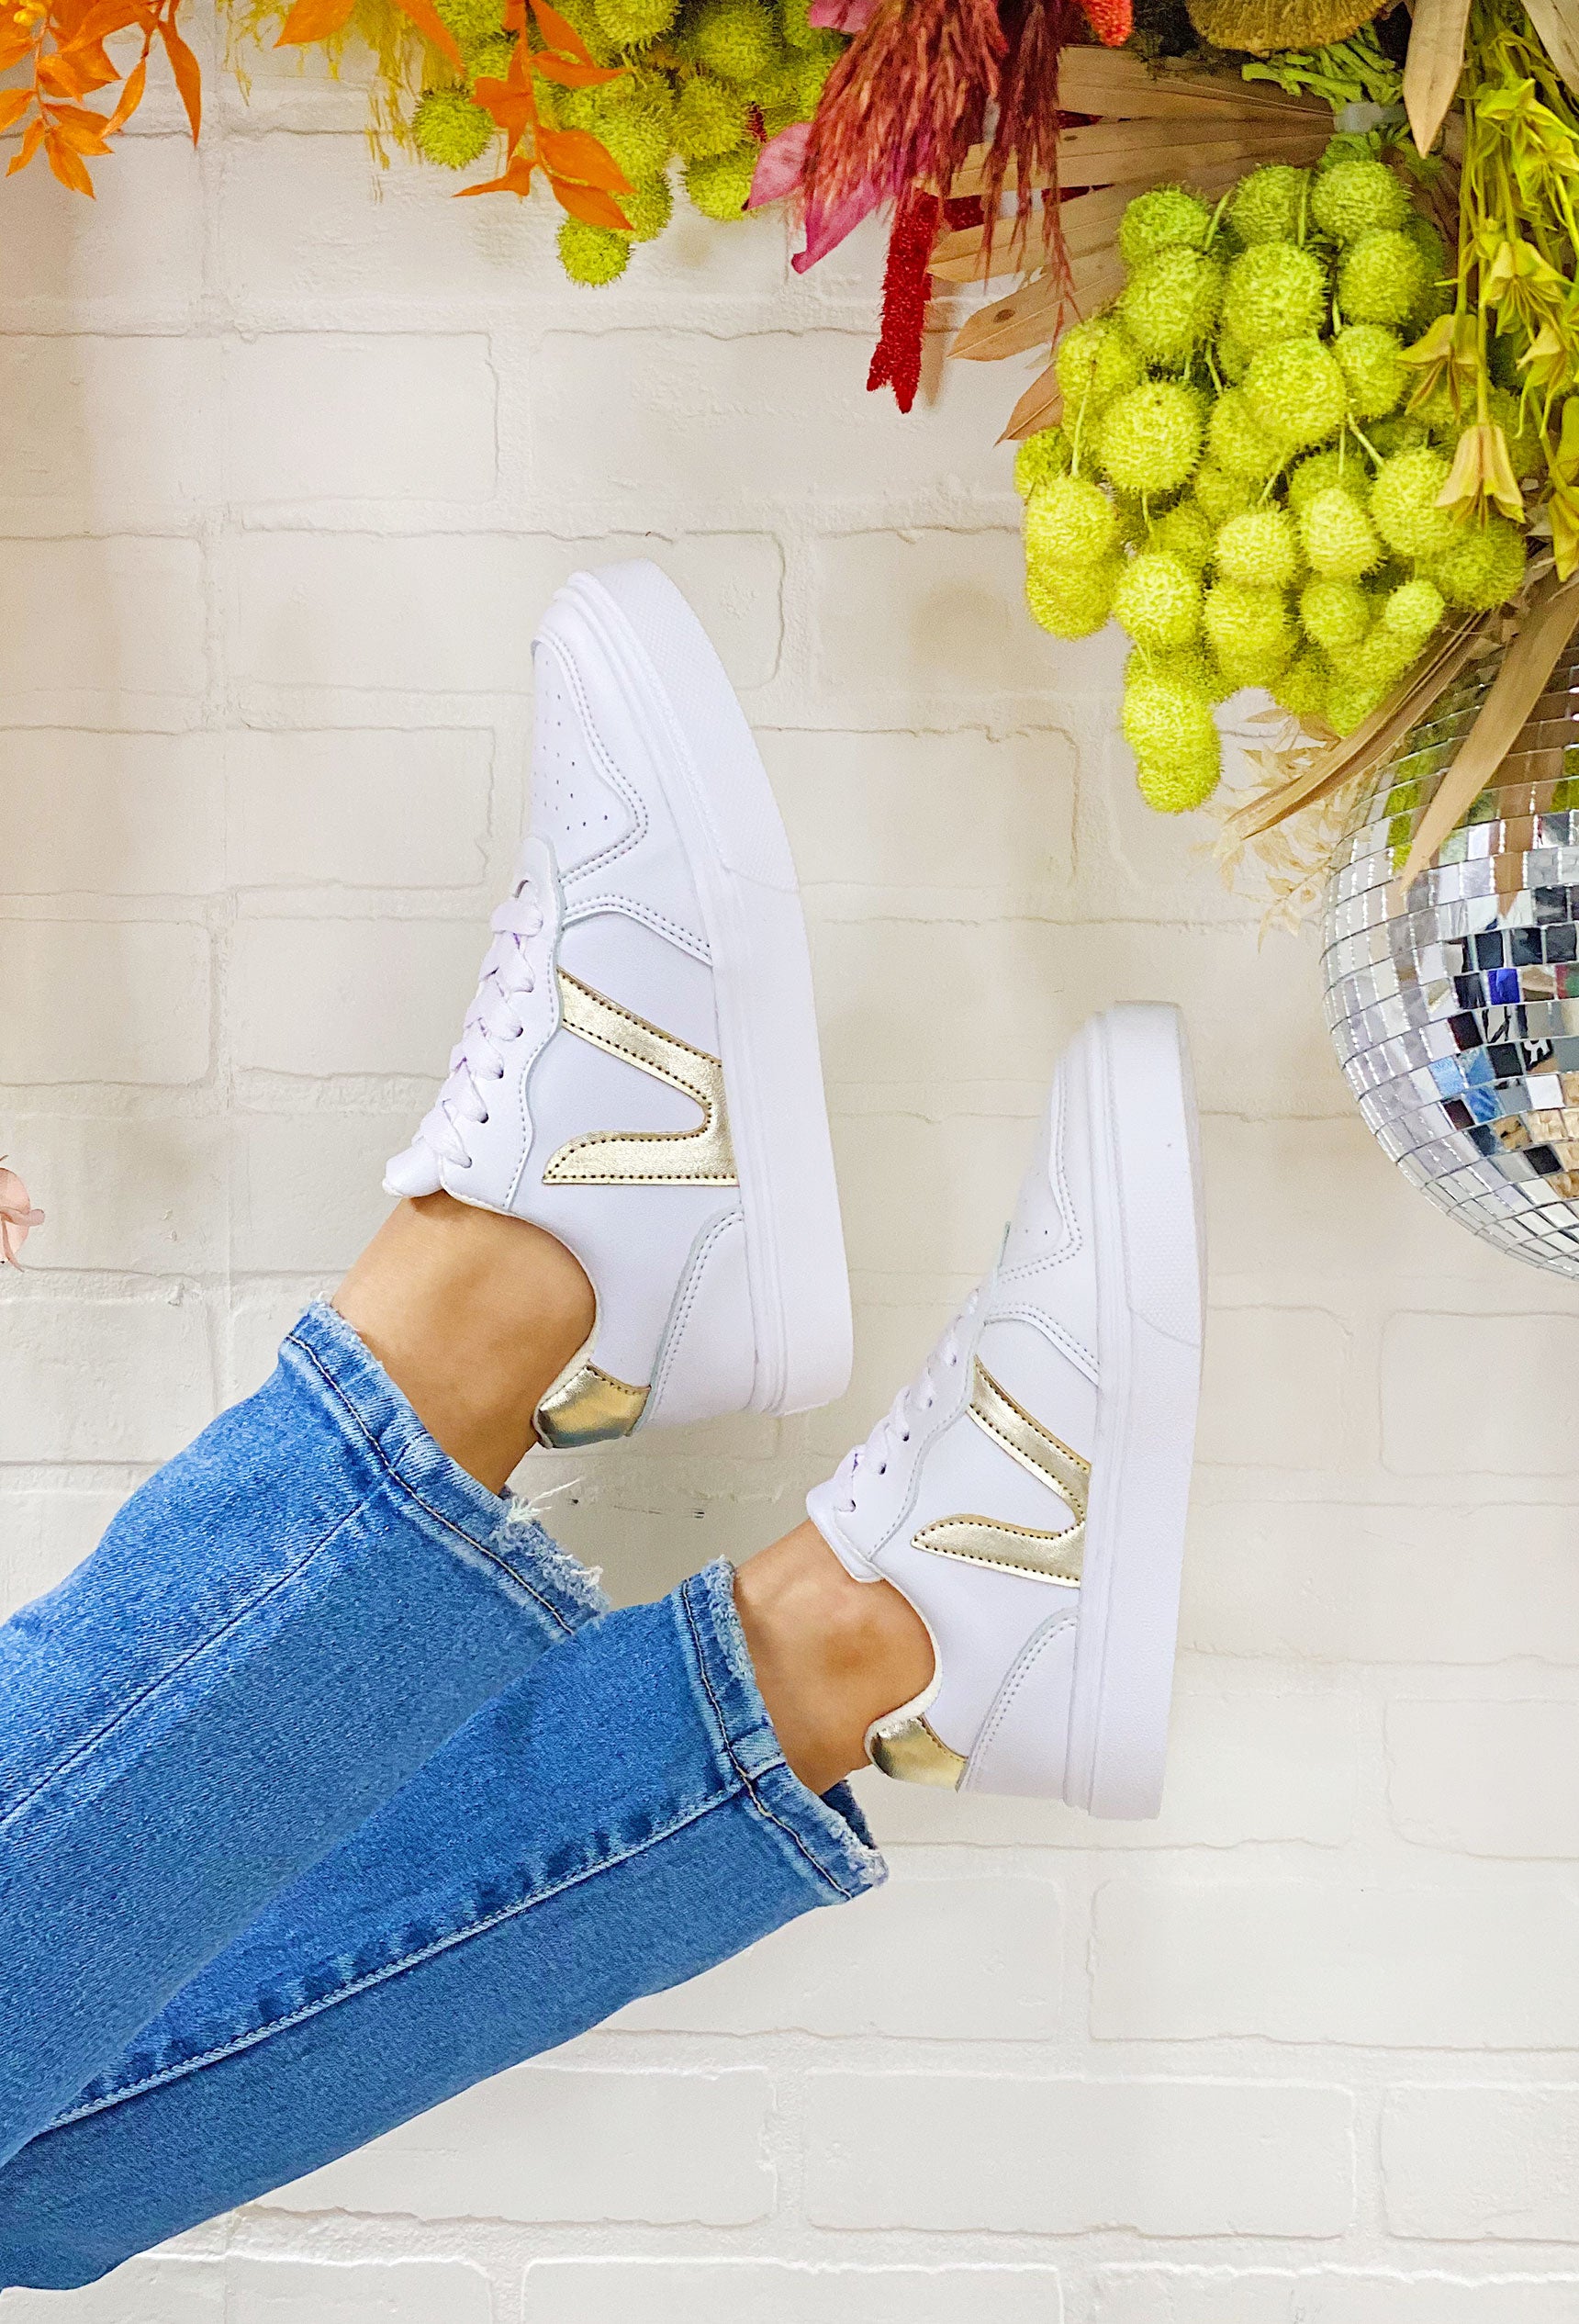 Miel Sneaker in Gold, white leather sneakers with gold accents